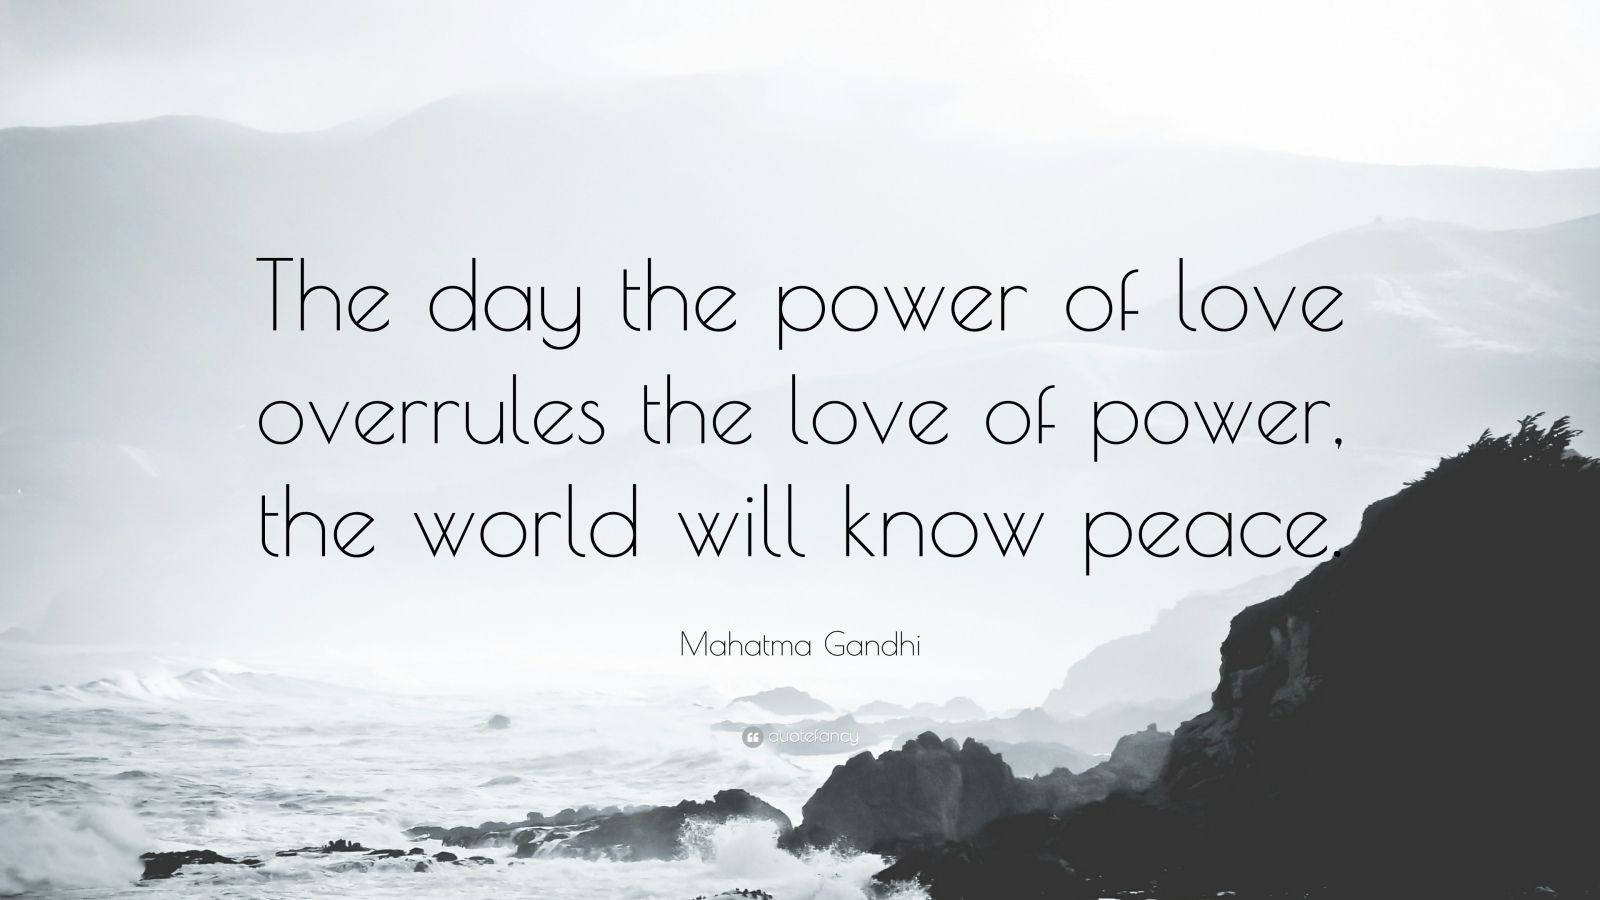 The Power Of Love Quote
 Mahatma Gandhi Quote “The day the power of love overrules